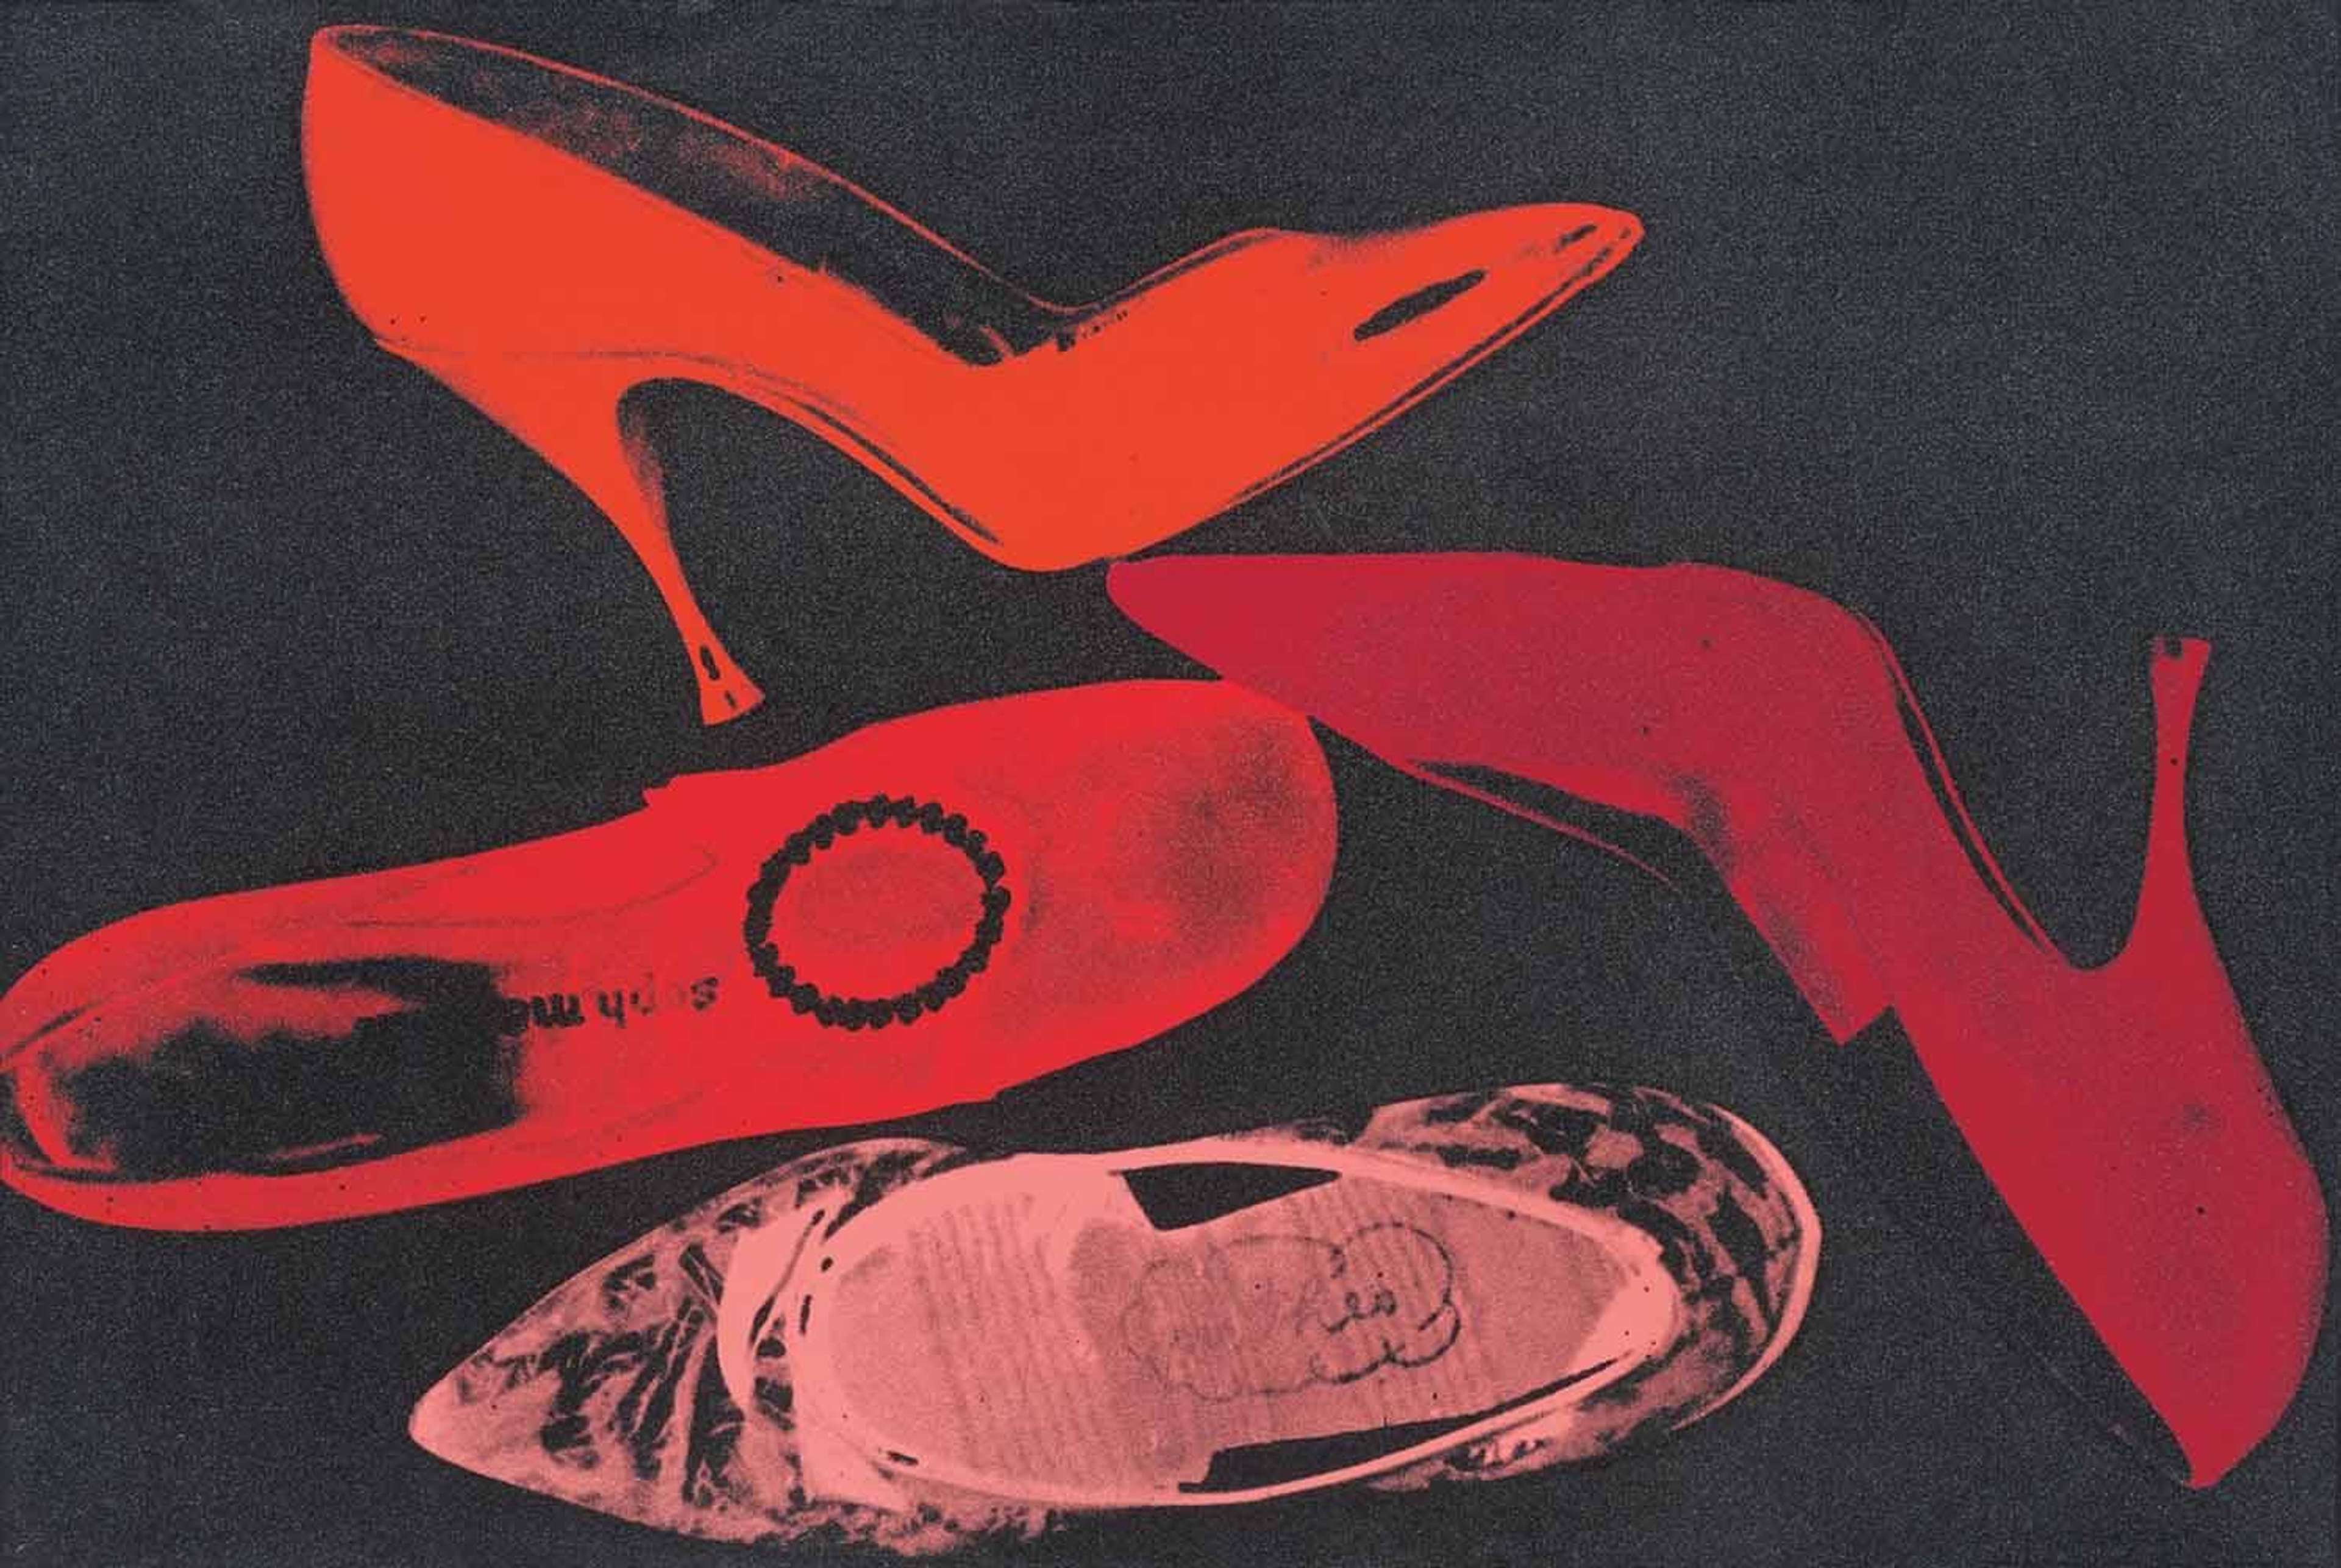 The print depicts four shoes arranged haphazardly, as if they had been dropped carelessly onto the floor. The shoes are rendered against a black backdrop in a variety of warm colours with orange, red and coral dominating the composition. The bright colours contrast with the dark, plain background, drawing attention towards the random arrangement of shoes.